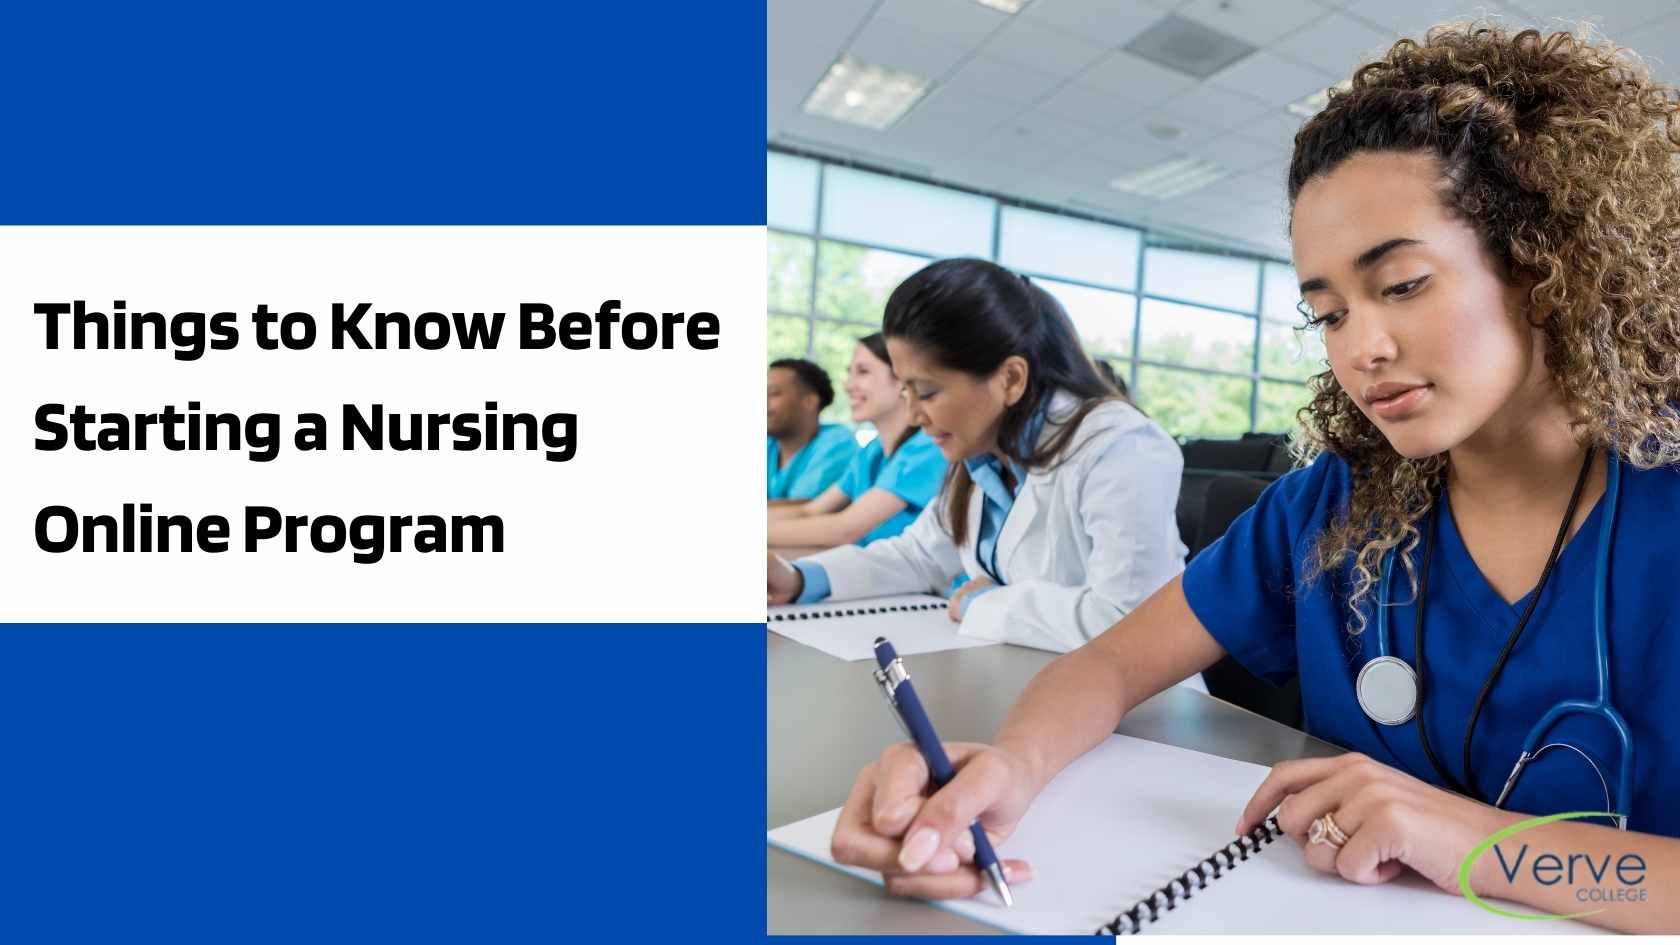 Things to Know Before Starting a Nursing Online Program